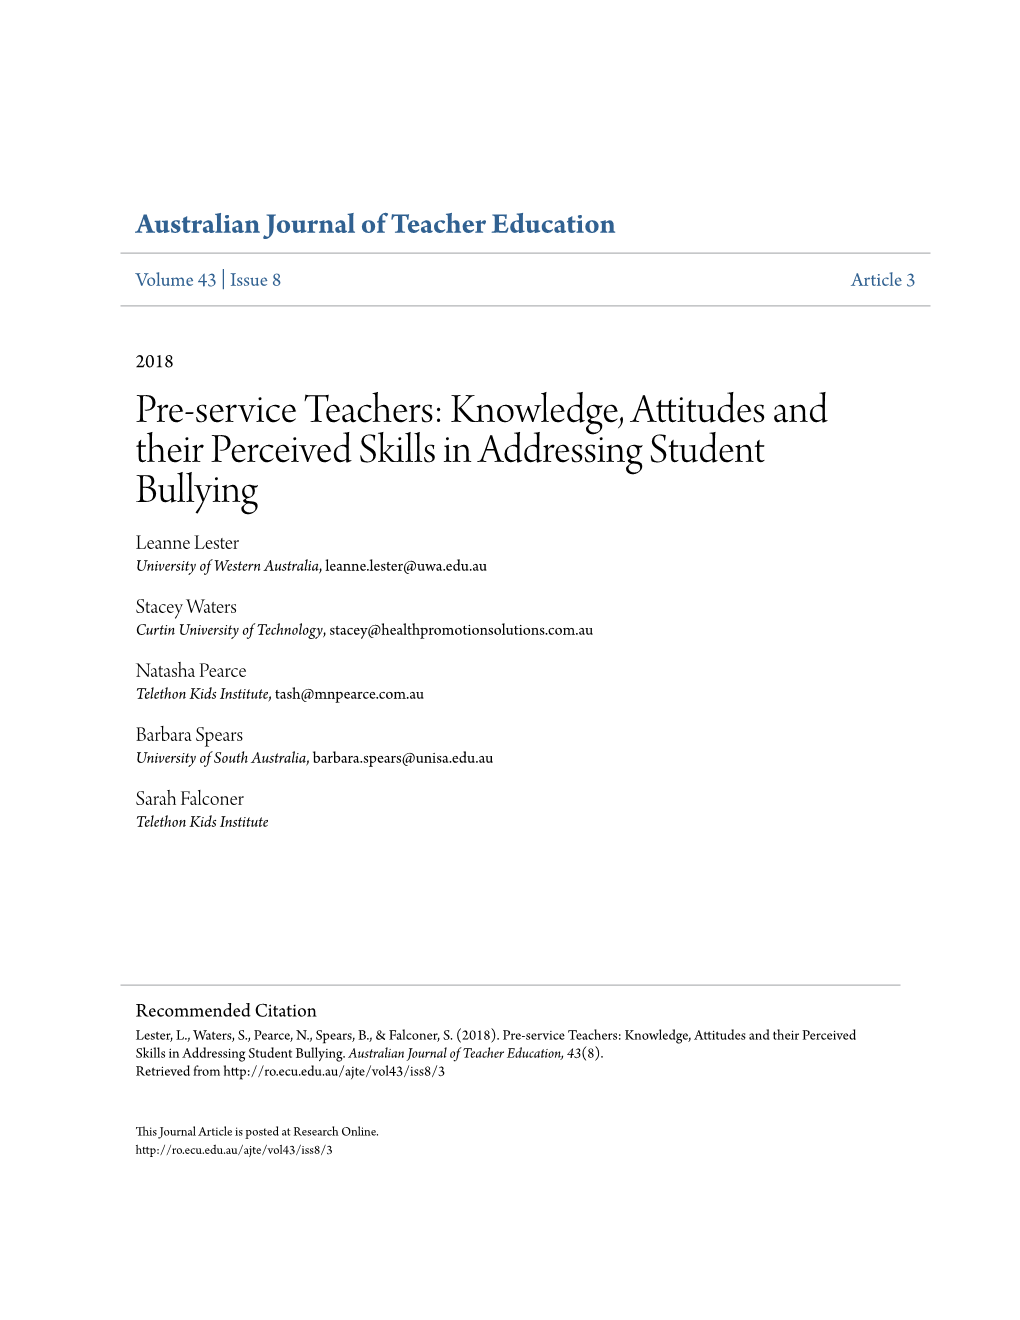 Pre-Service Teachers: Knowledge, Attitudes and Their Perceived Skills